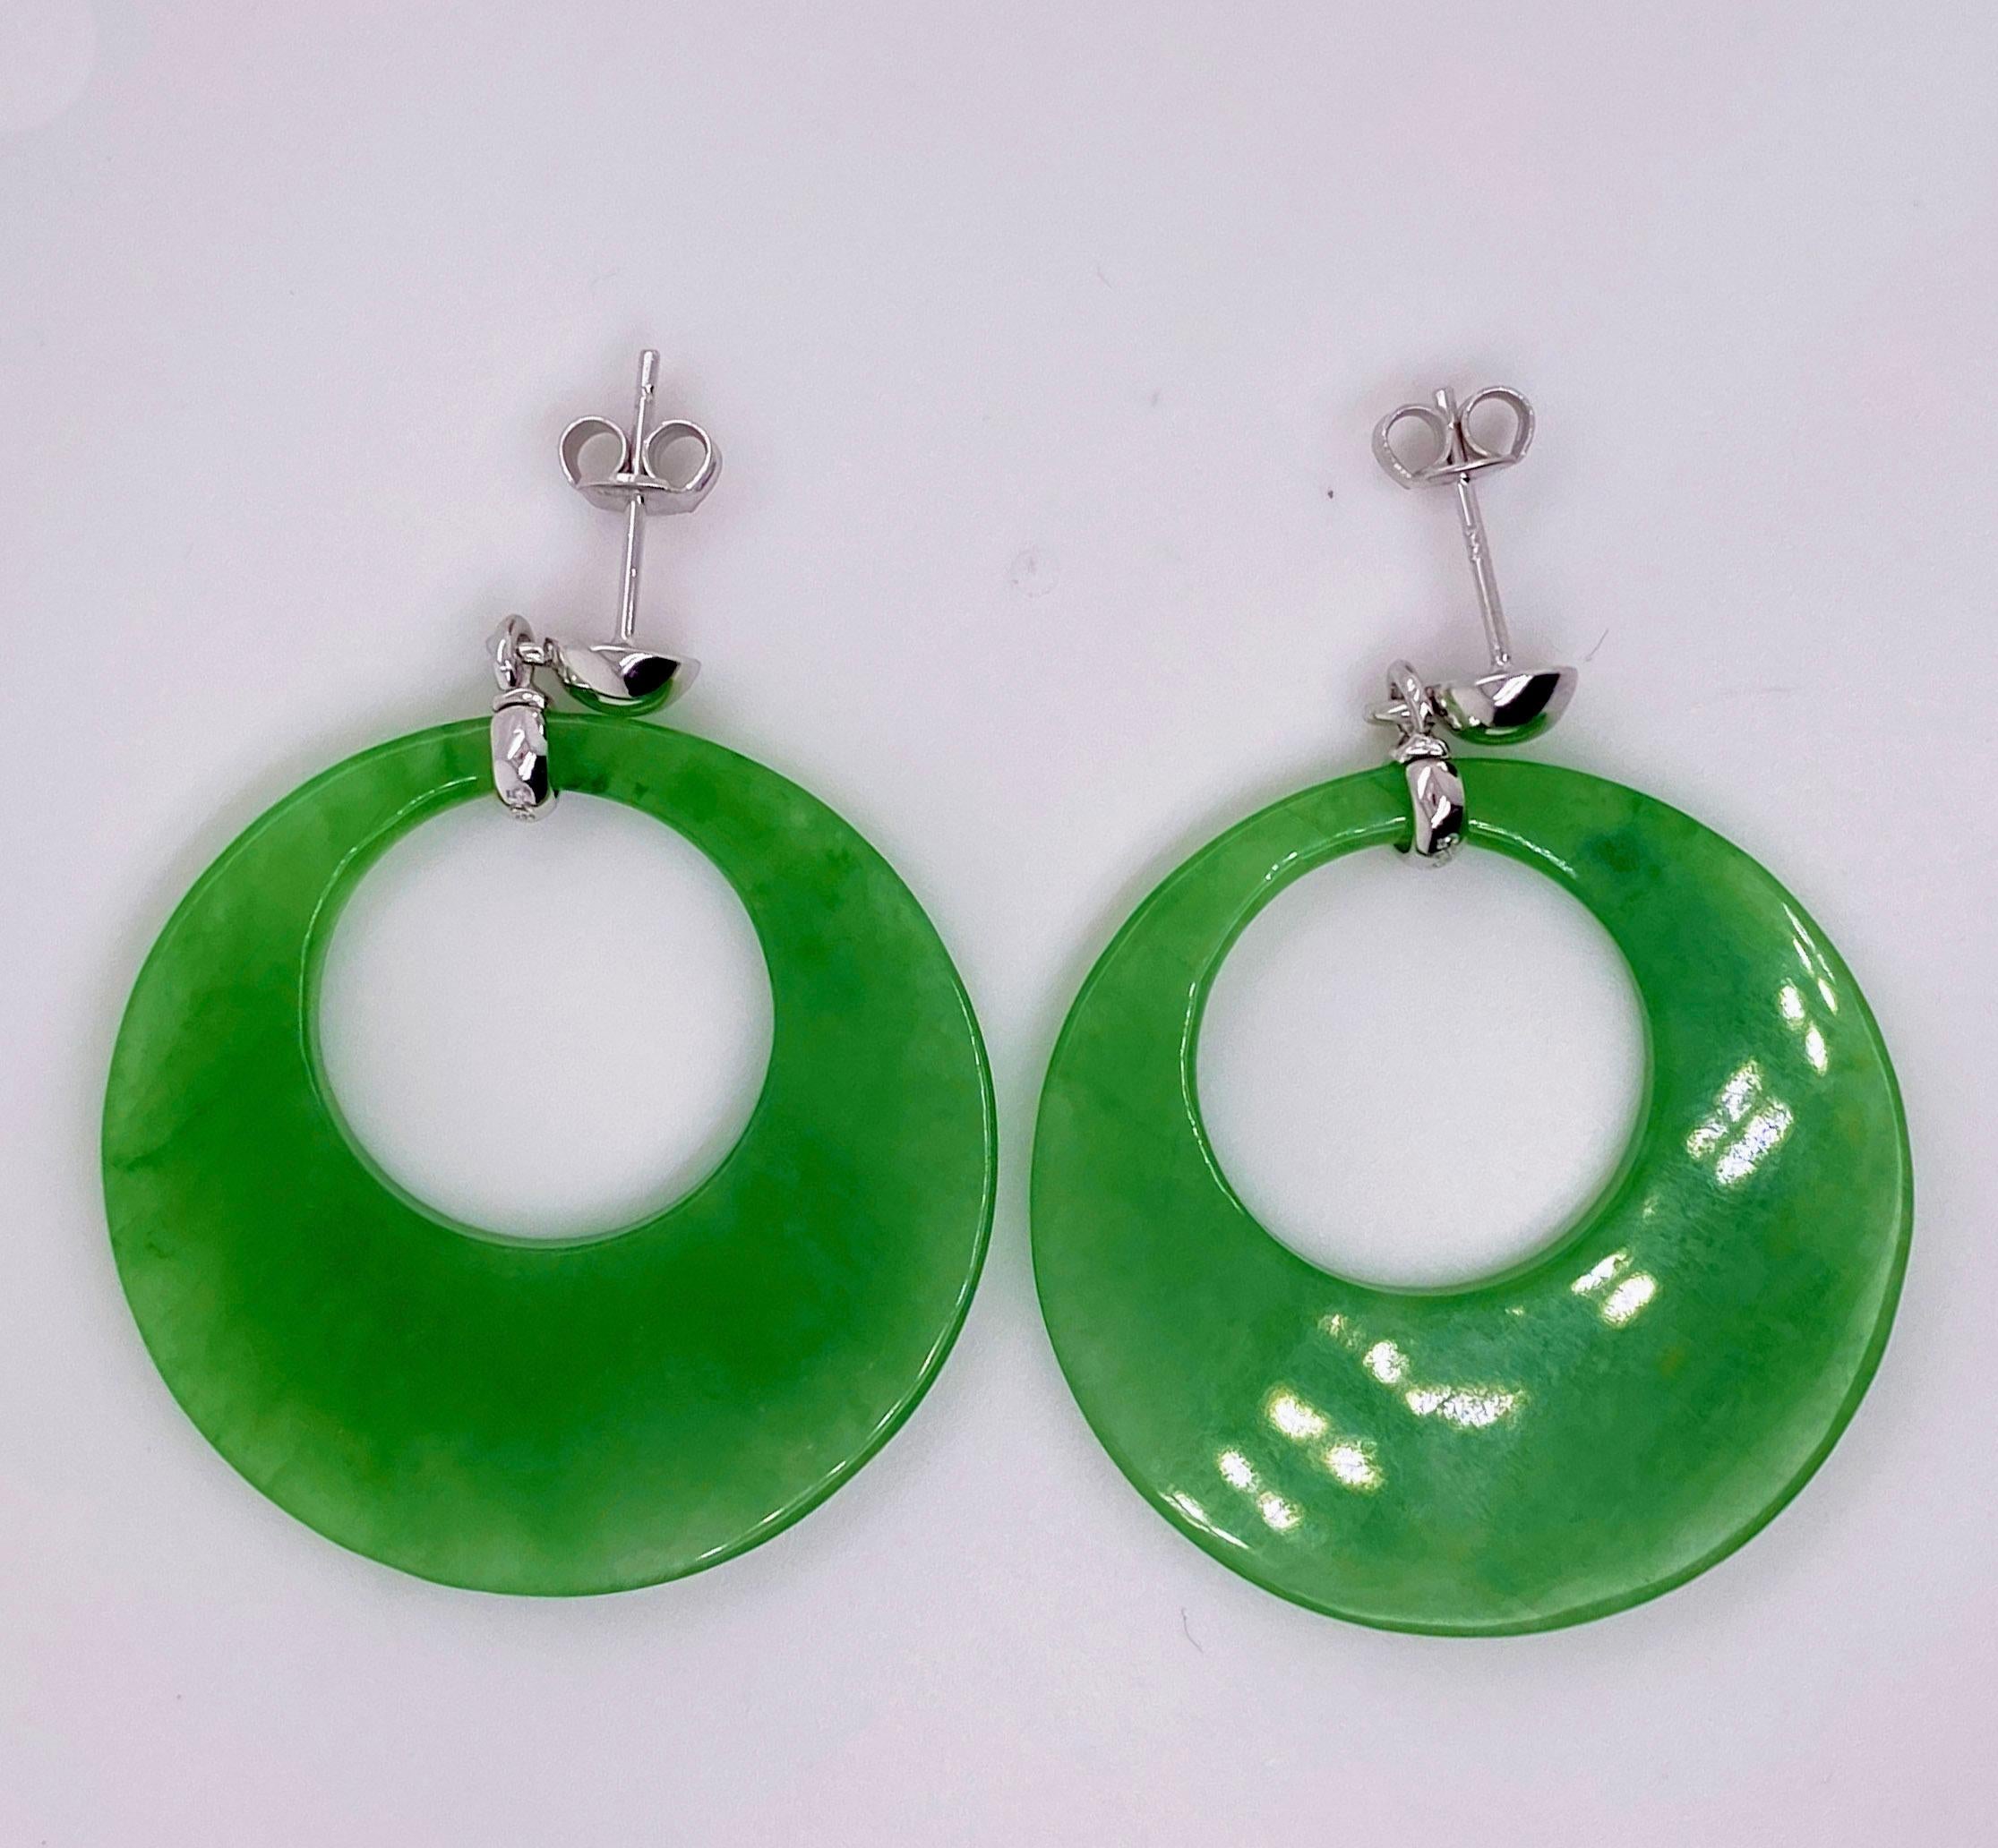 The details for these gorgeous earrings are listed below:
Metal Quality: Sterling Silver 
Earring Type: Stud 
Gemstone: Jade 
Gemstone Measurements: 3.5 cm X 3.5 cm
Gemstone Color: Green 
Measurements: 3.5 cm X 3.5 cm
Post Type: Posts-Sterling
Total